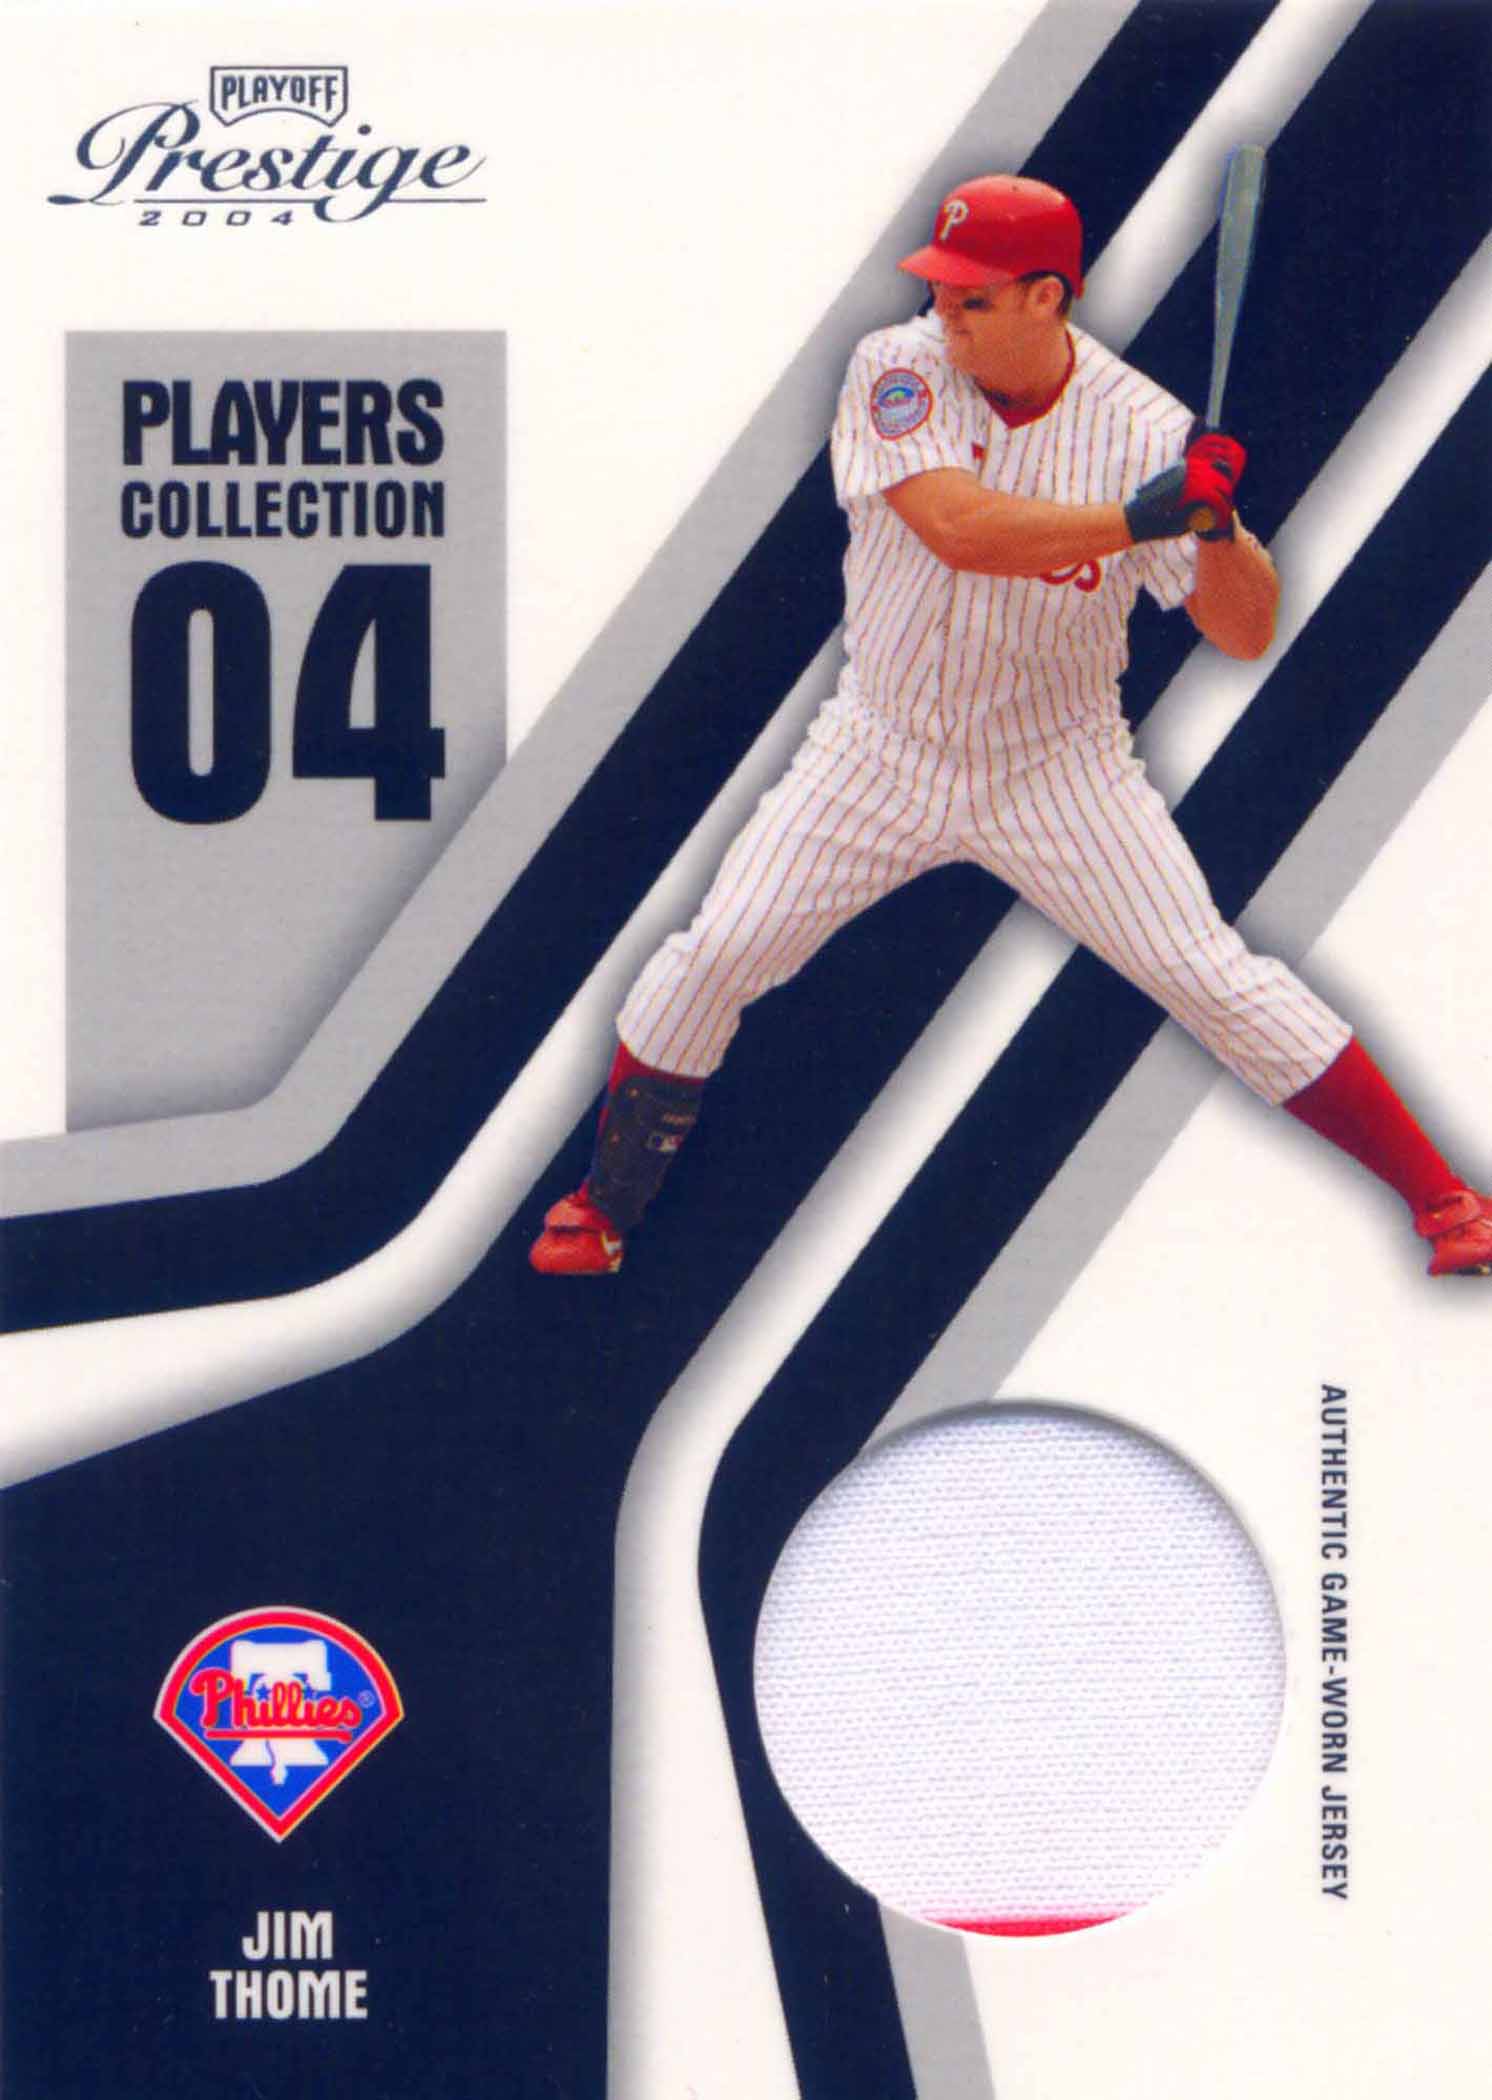 2004 Playoff Prestige Players Collection Jersey